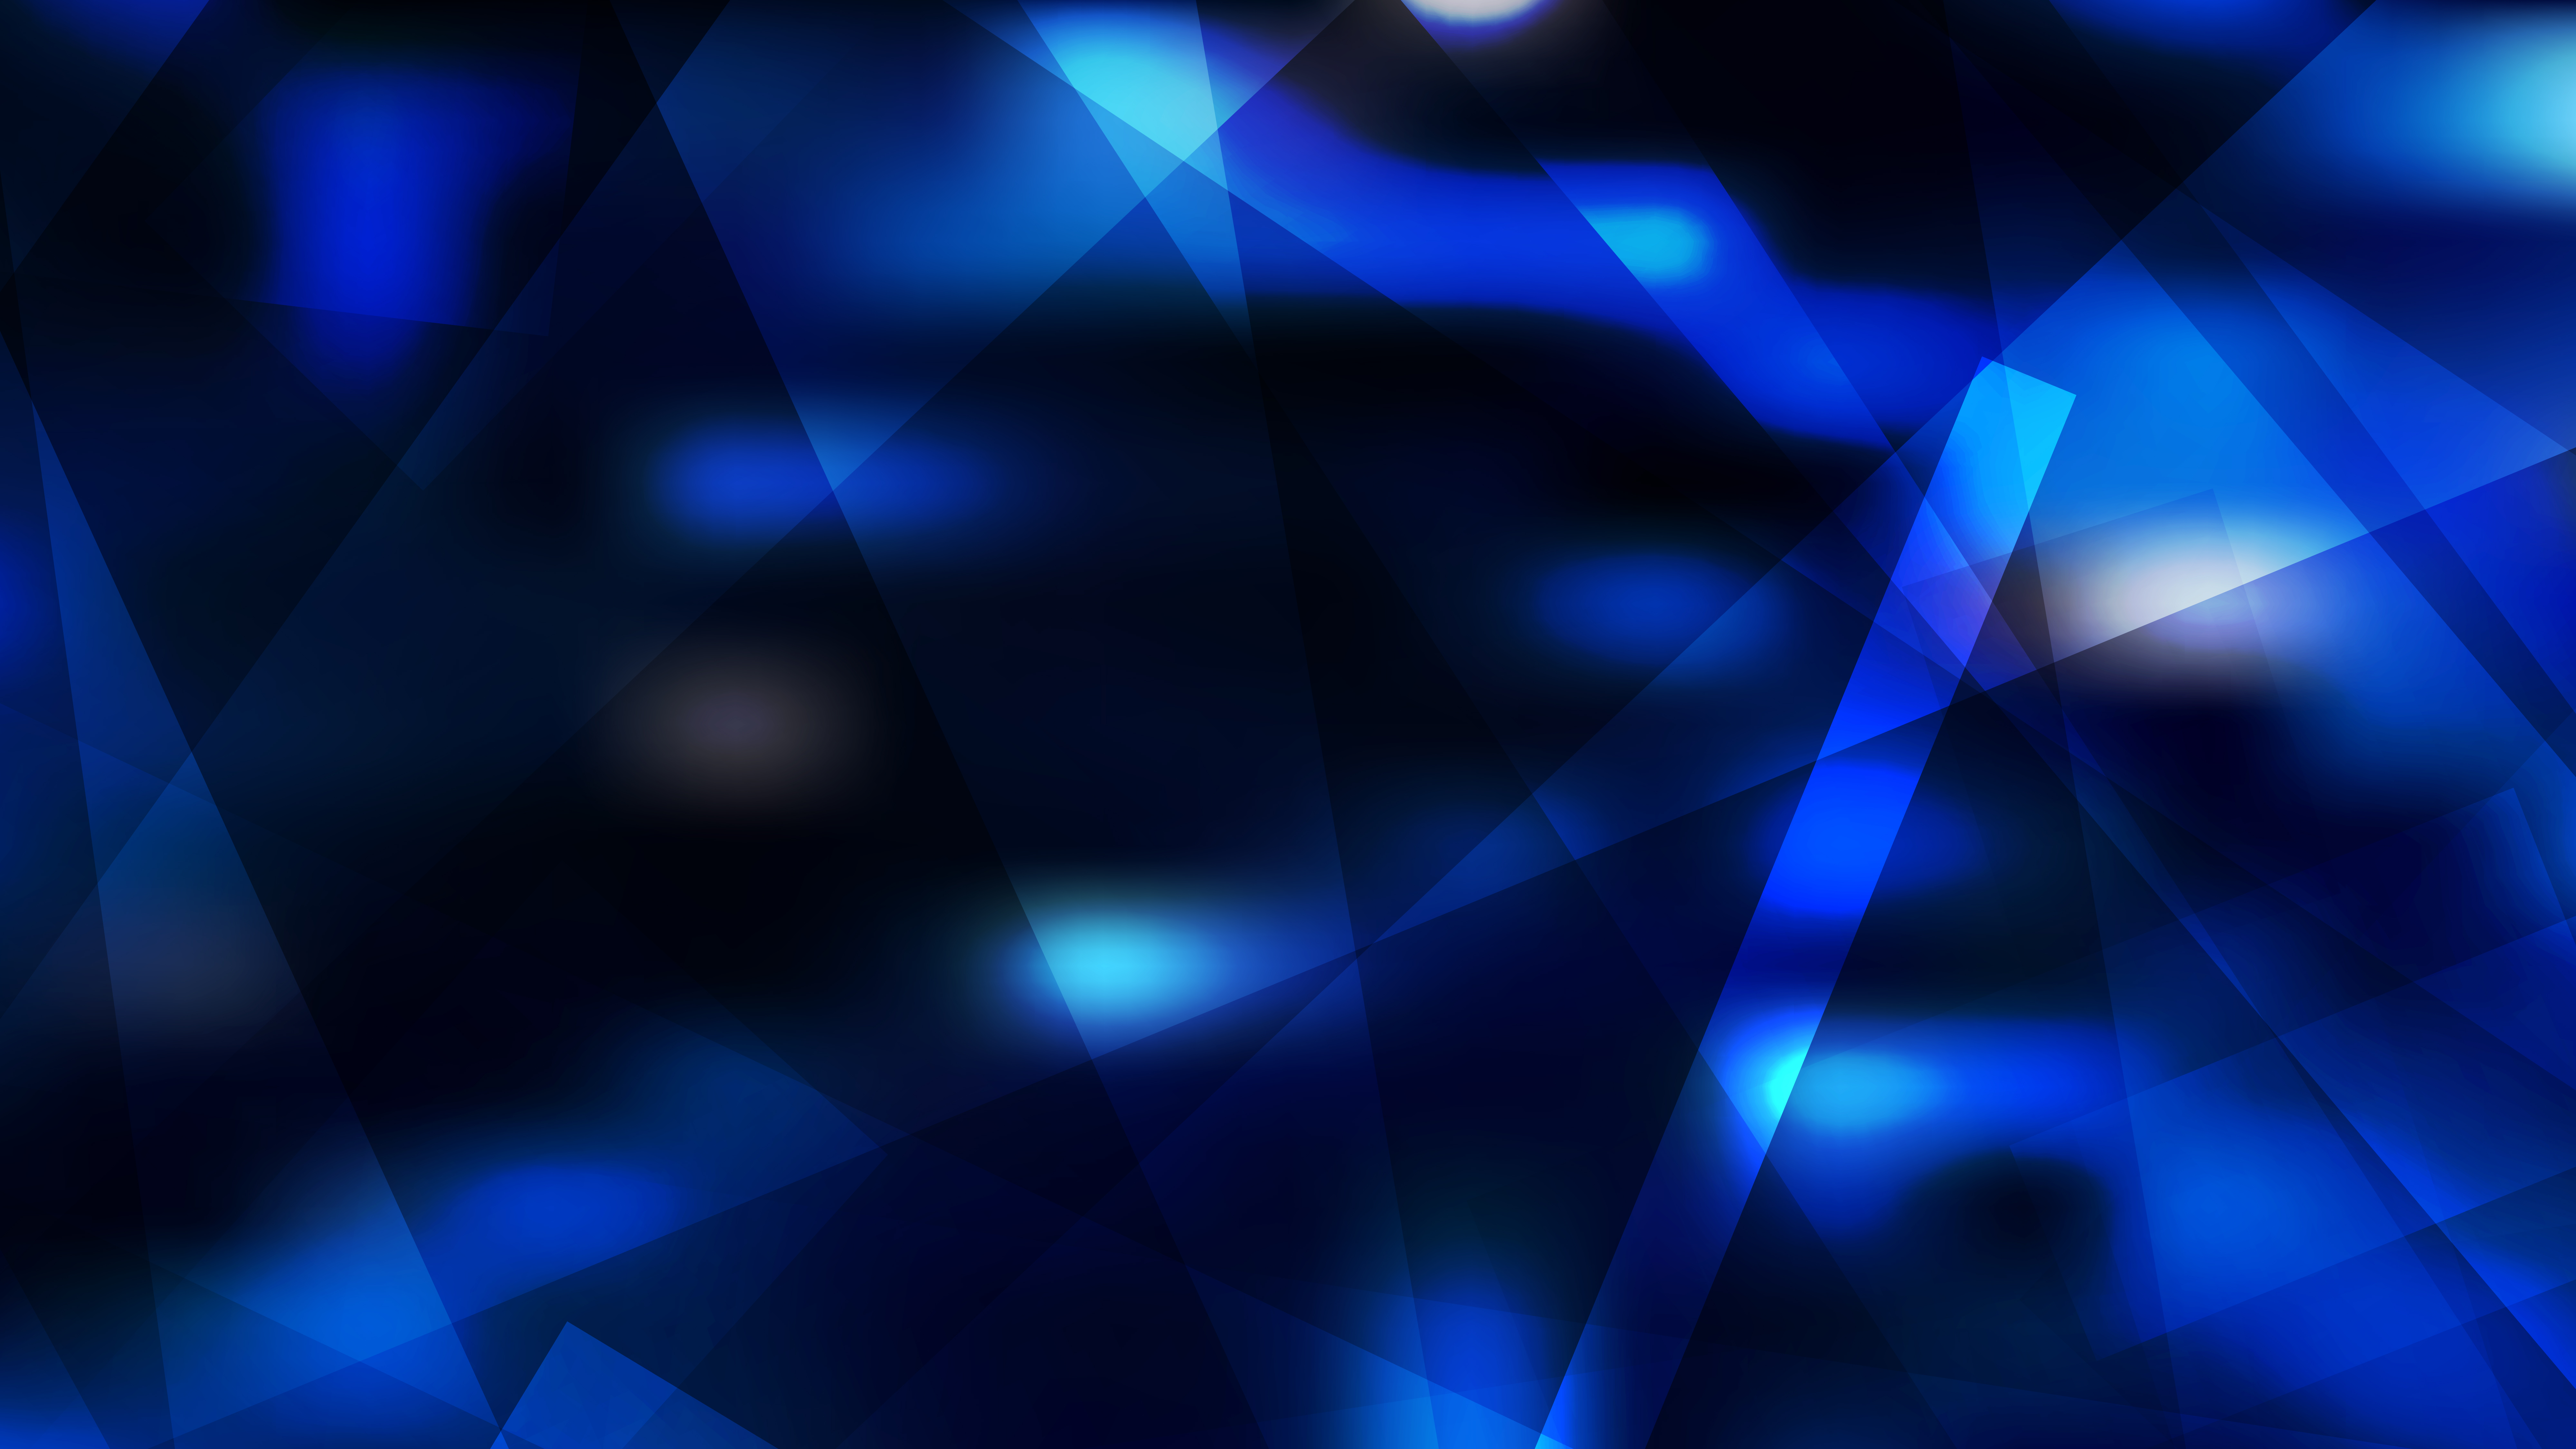 Free Abstract Geometric Cool Blue Background